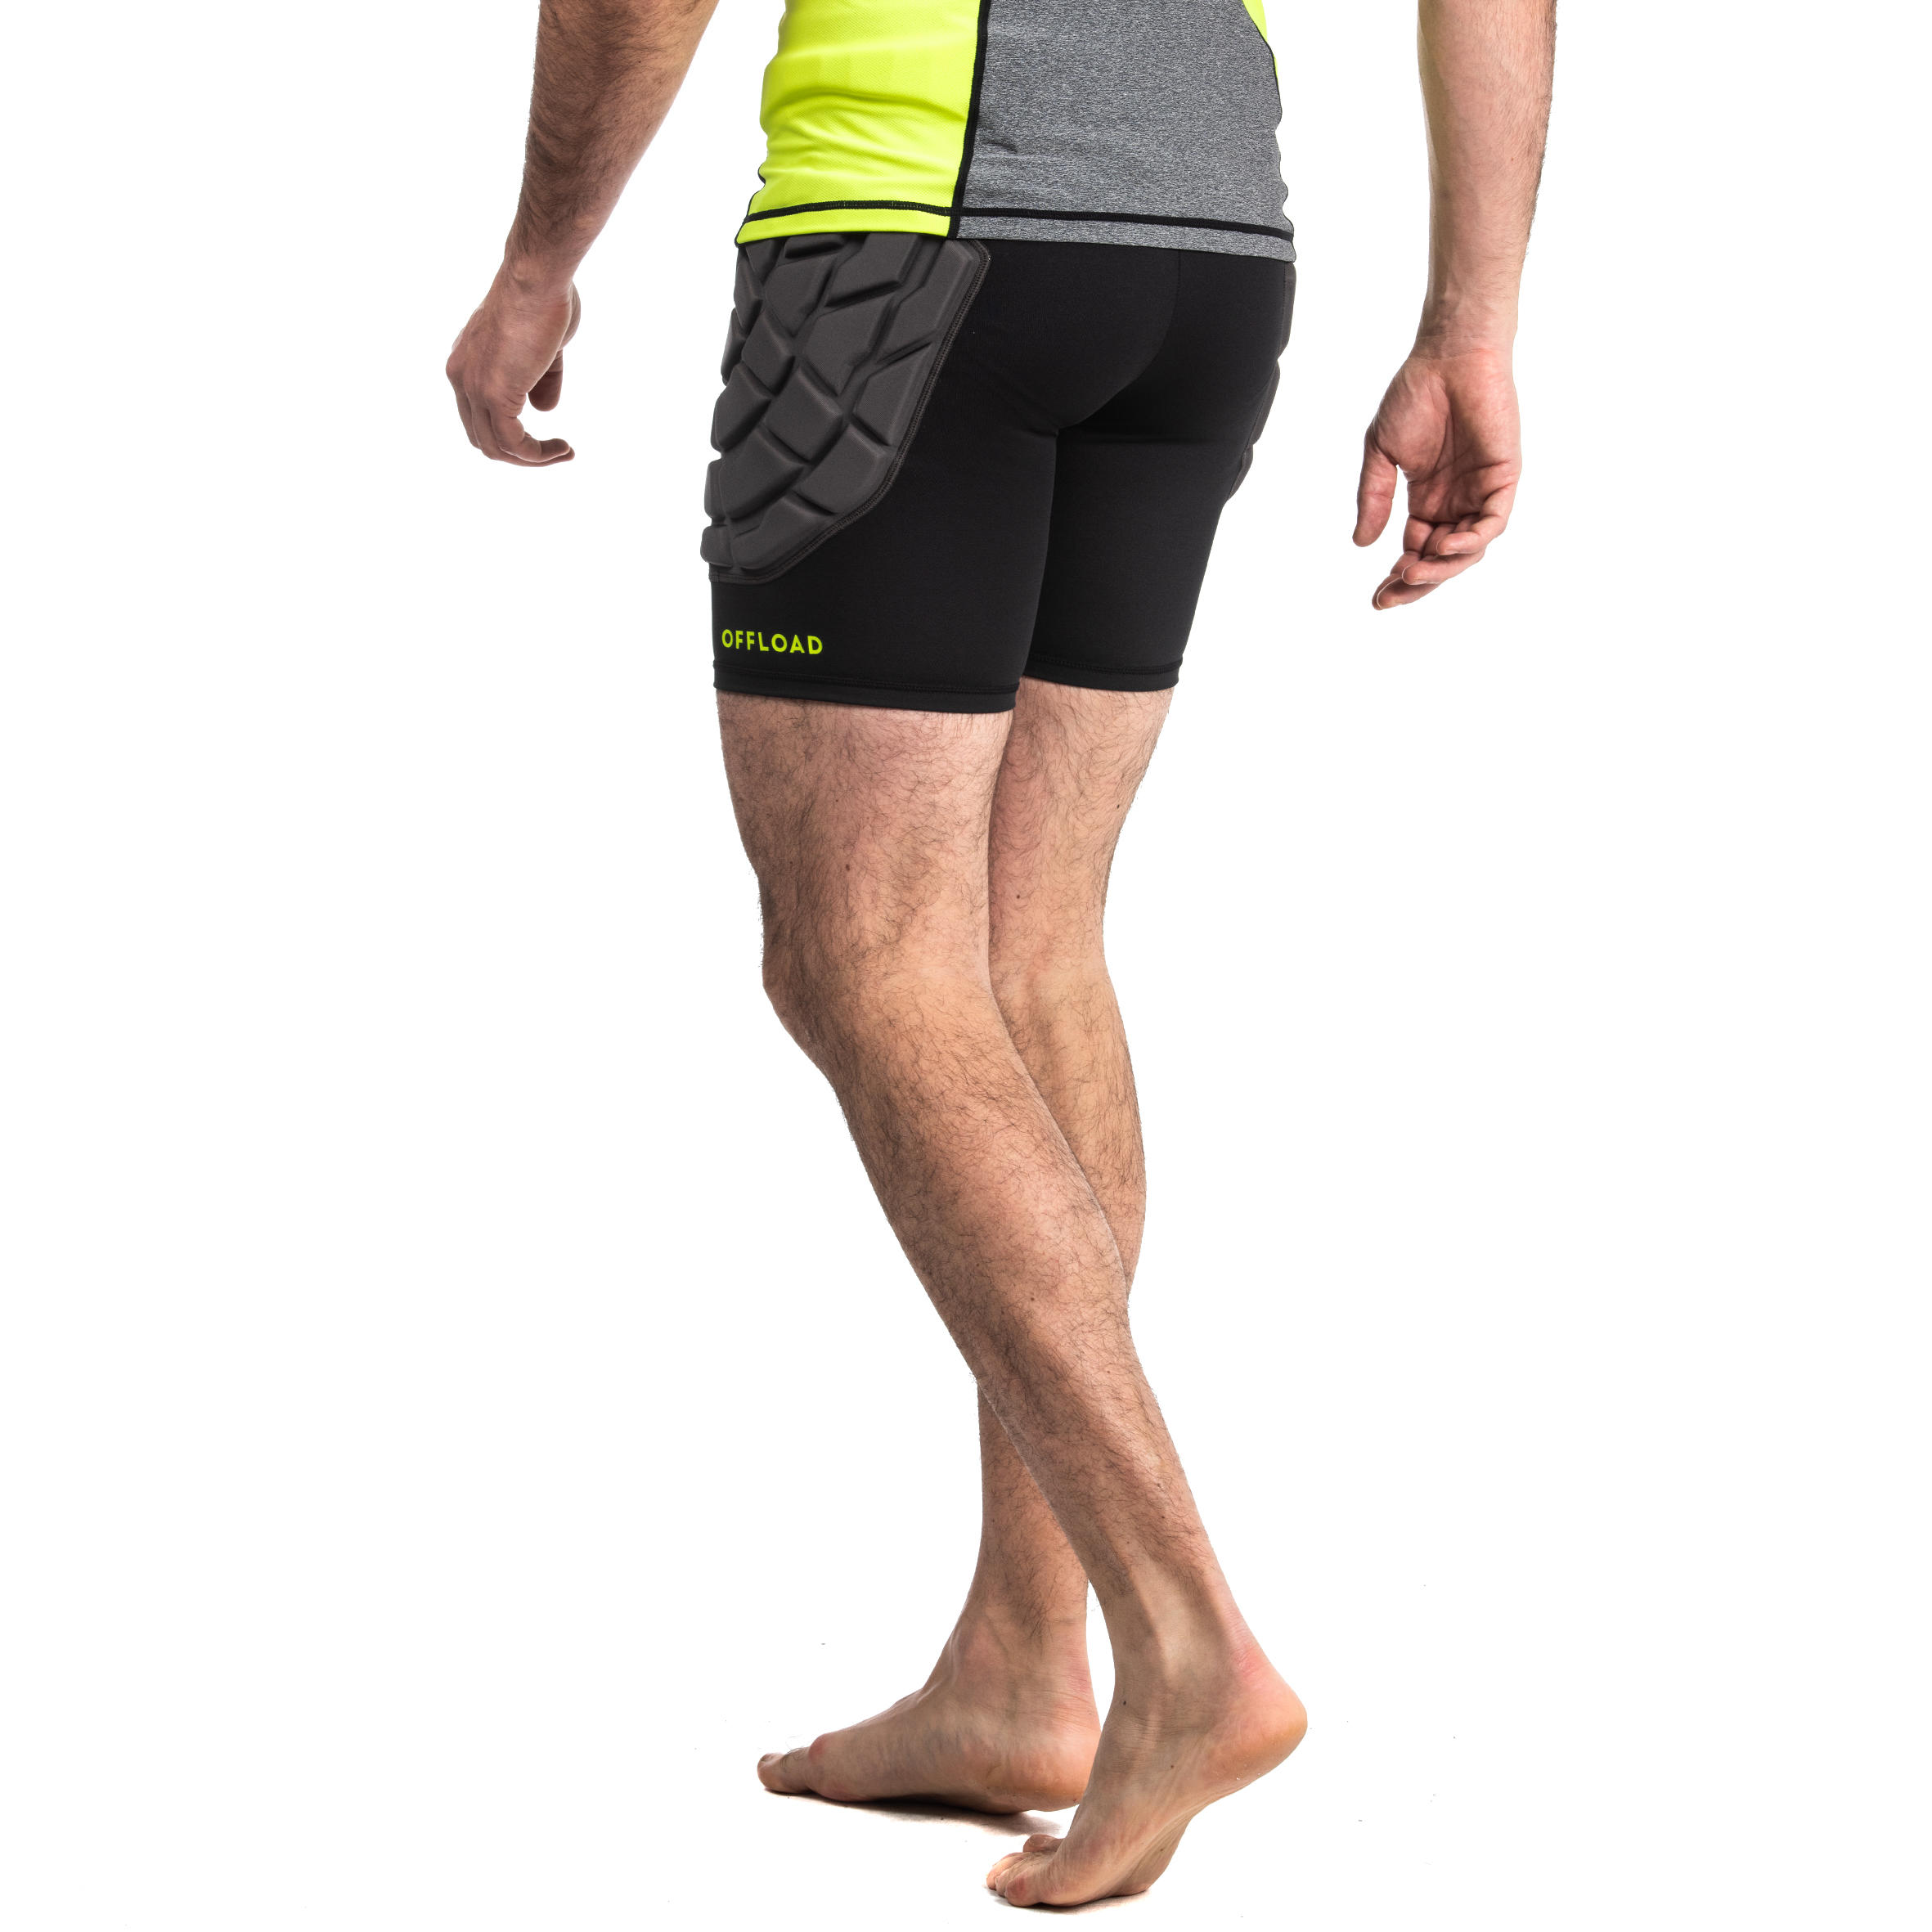 Men's Protective Rugby Undershorts R500 - Black/Yellow 4/9